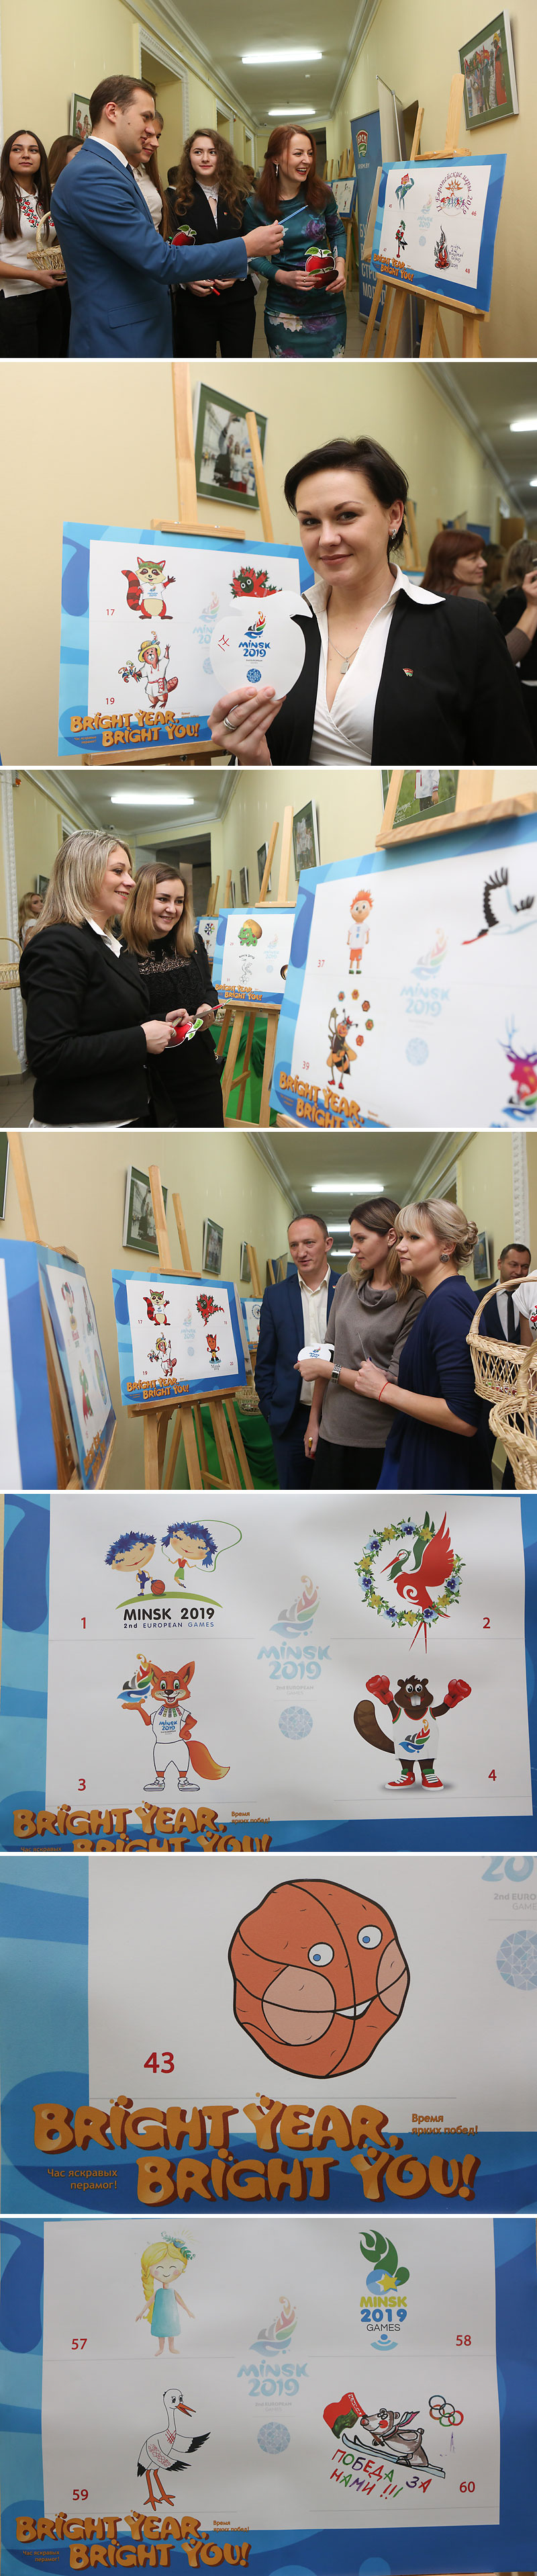 Best works of the 2019 European Games mascot design contest on display in Minsk (November 2017). No final decision has been made yet